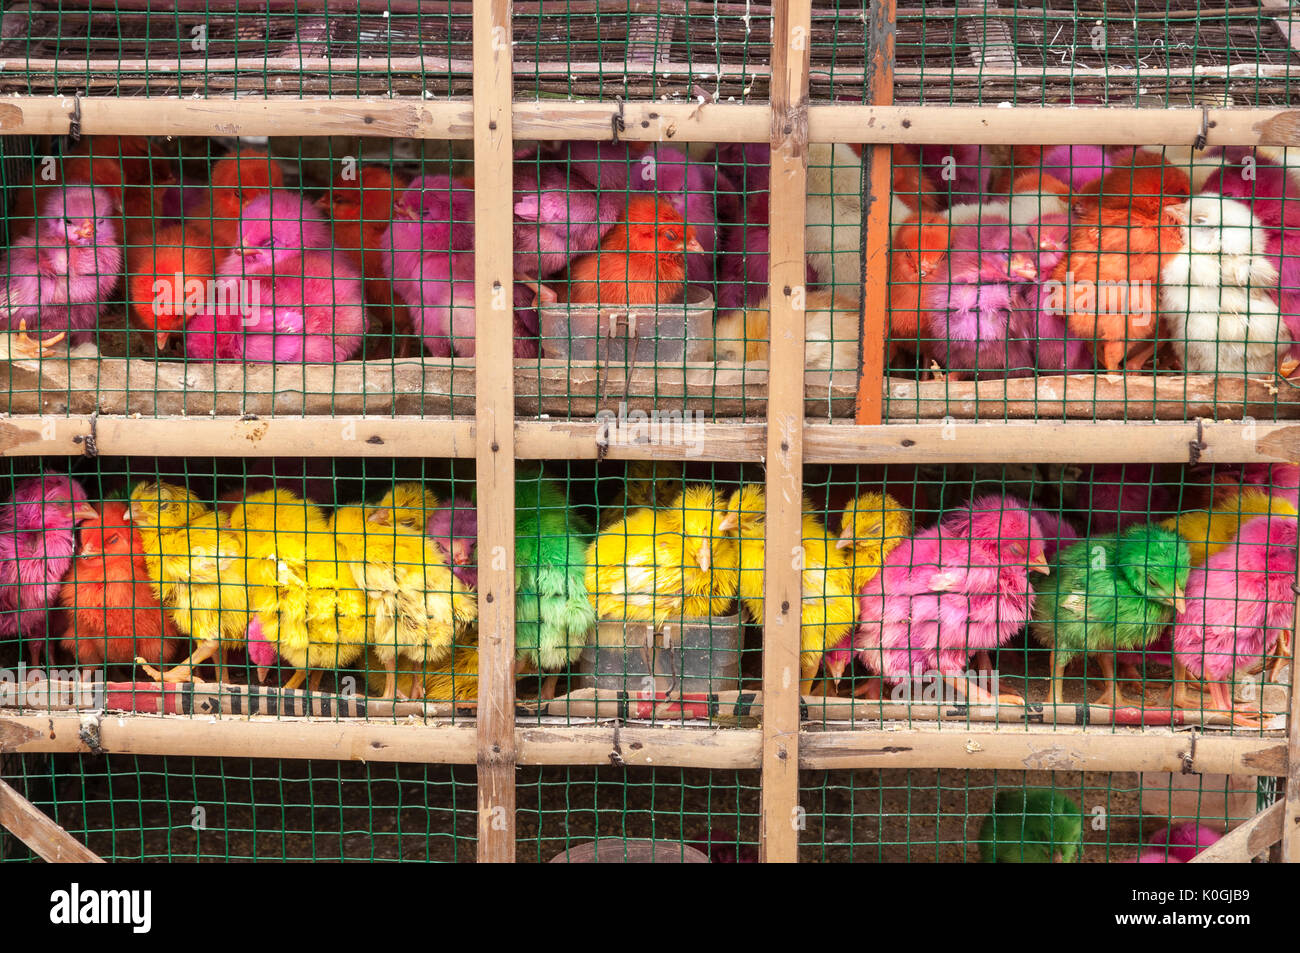 Artificially coloured chicks for sale at the bird and animal market in Denpasar, Southern Bali, Indonesia. Stock Photo